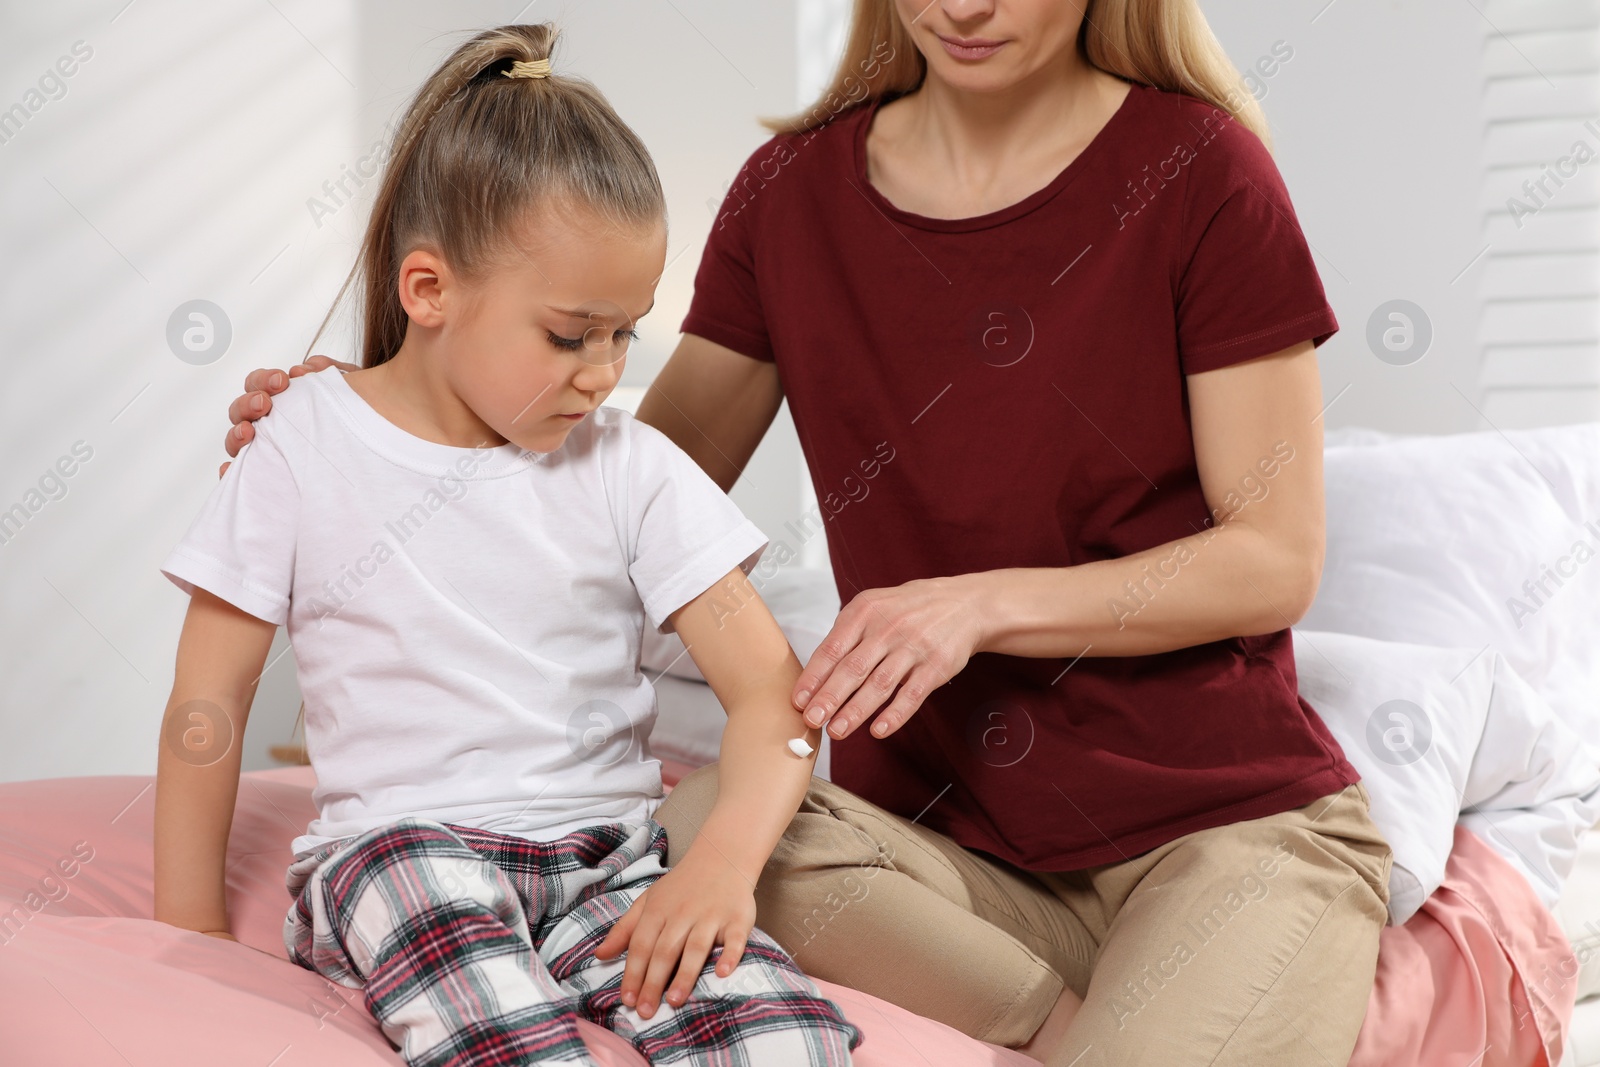 Photo of Mother applying ointment onto her daughter's arm on bed